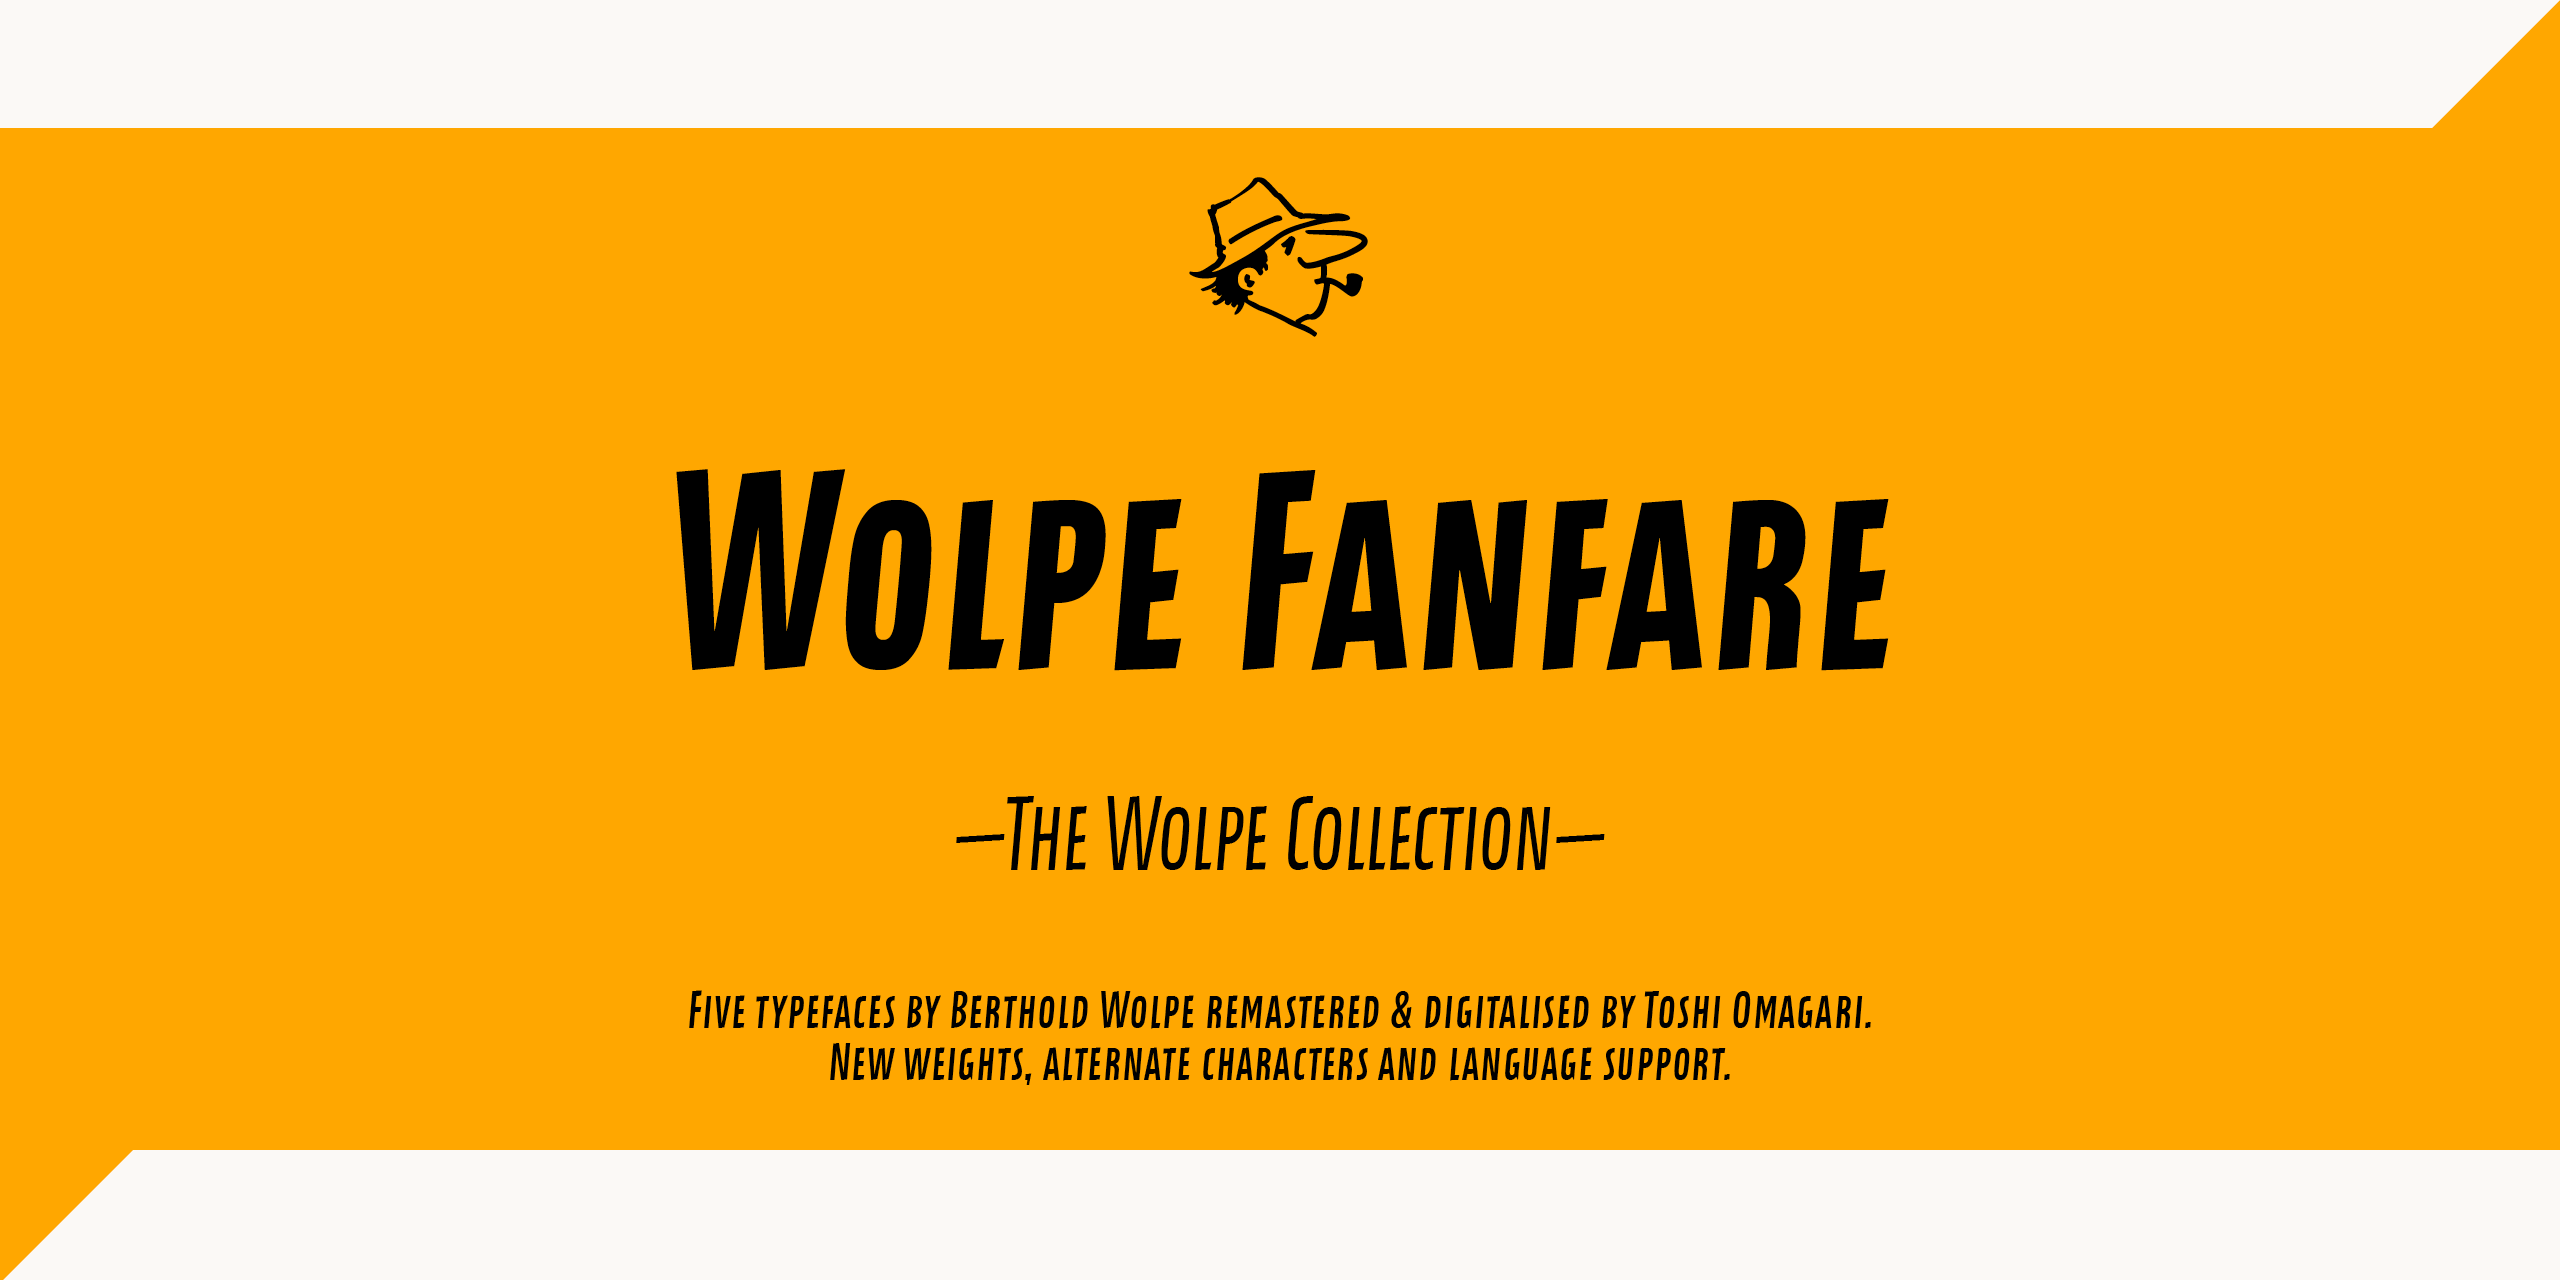 The Wolpe Collection – Wolpe Fanfare